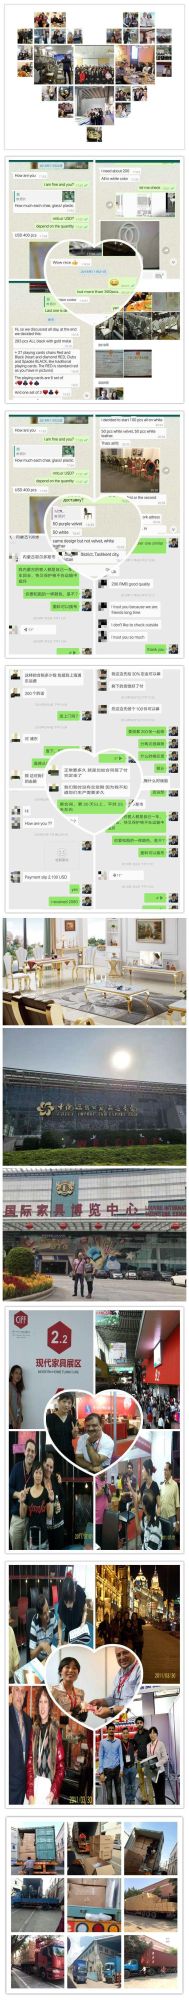 Modern Event Furniture Hotel Wedding Chair Throne Chairs Banquet Dining Table and Chair Sets Custom Made Square Glass Dining Sets